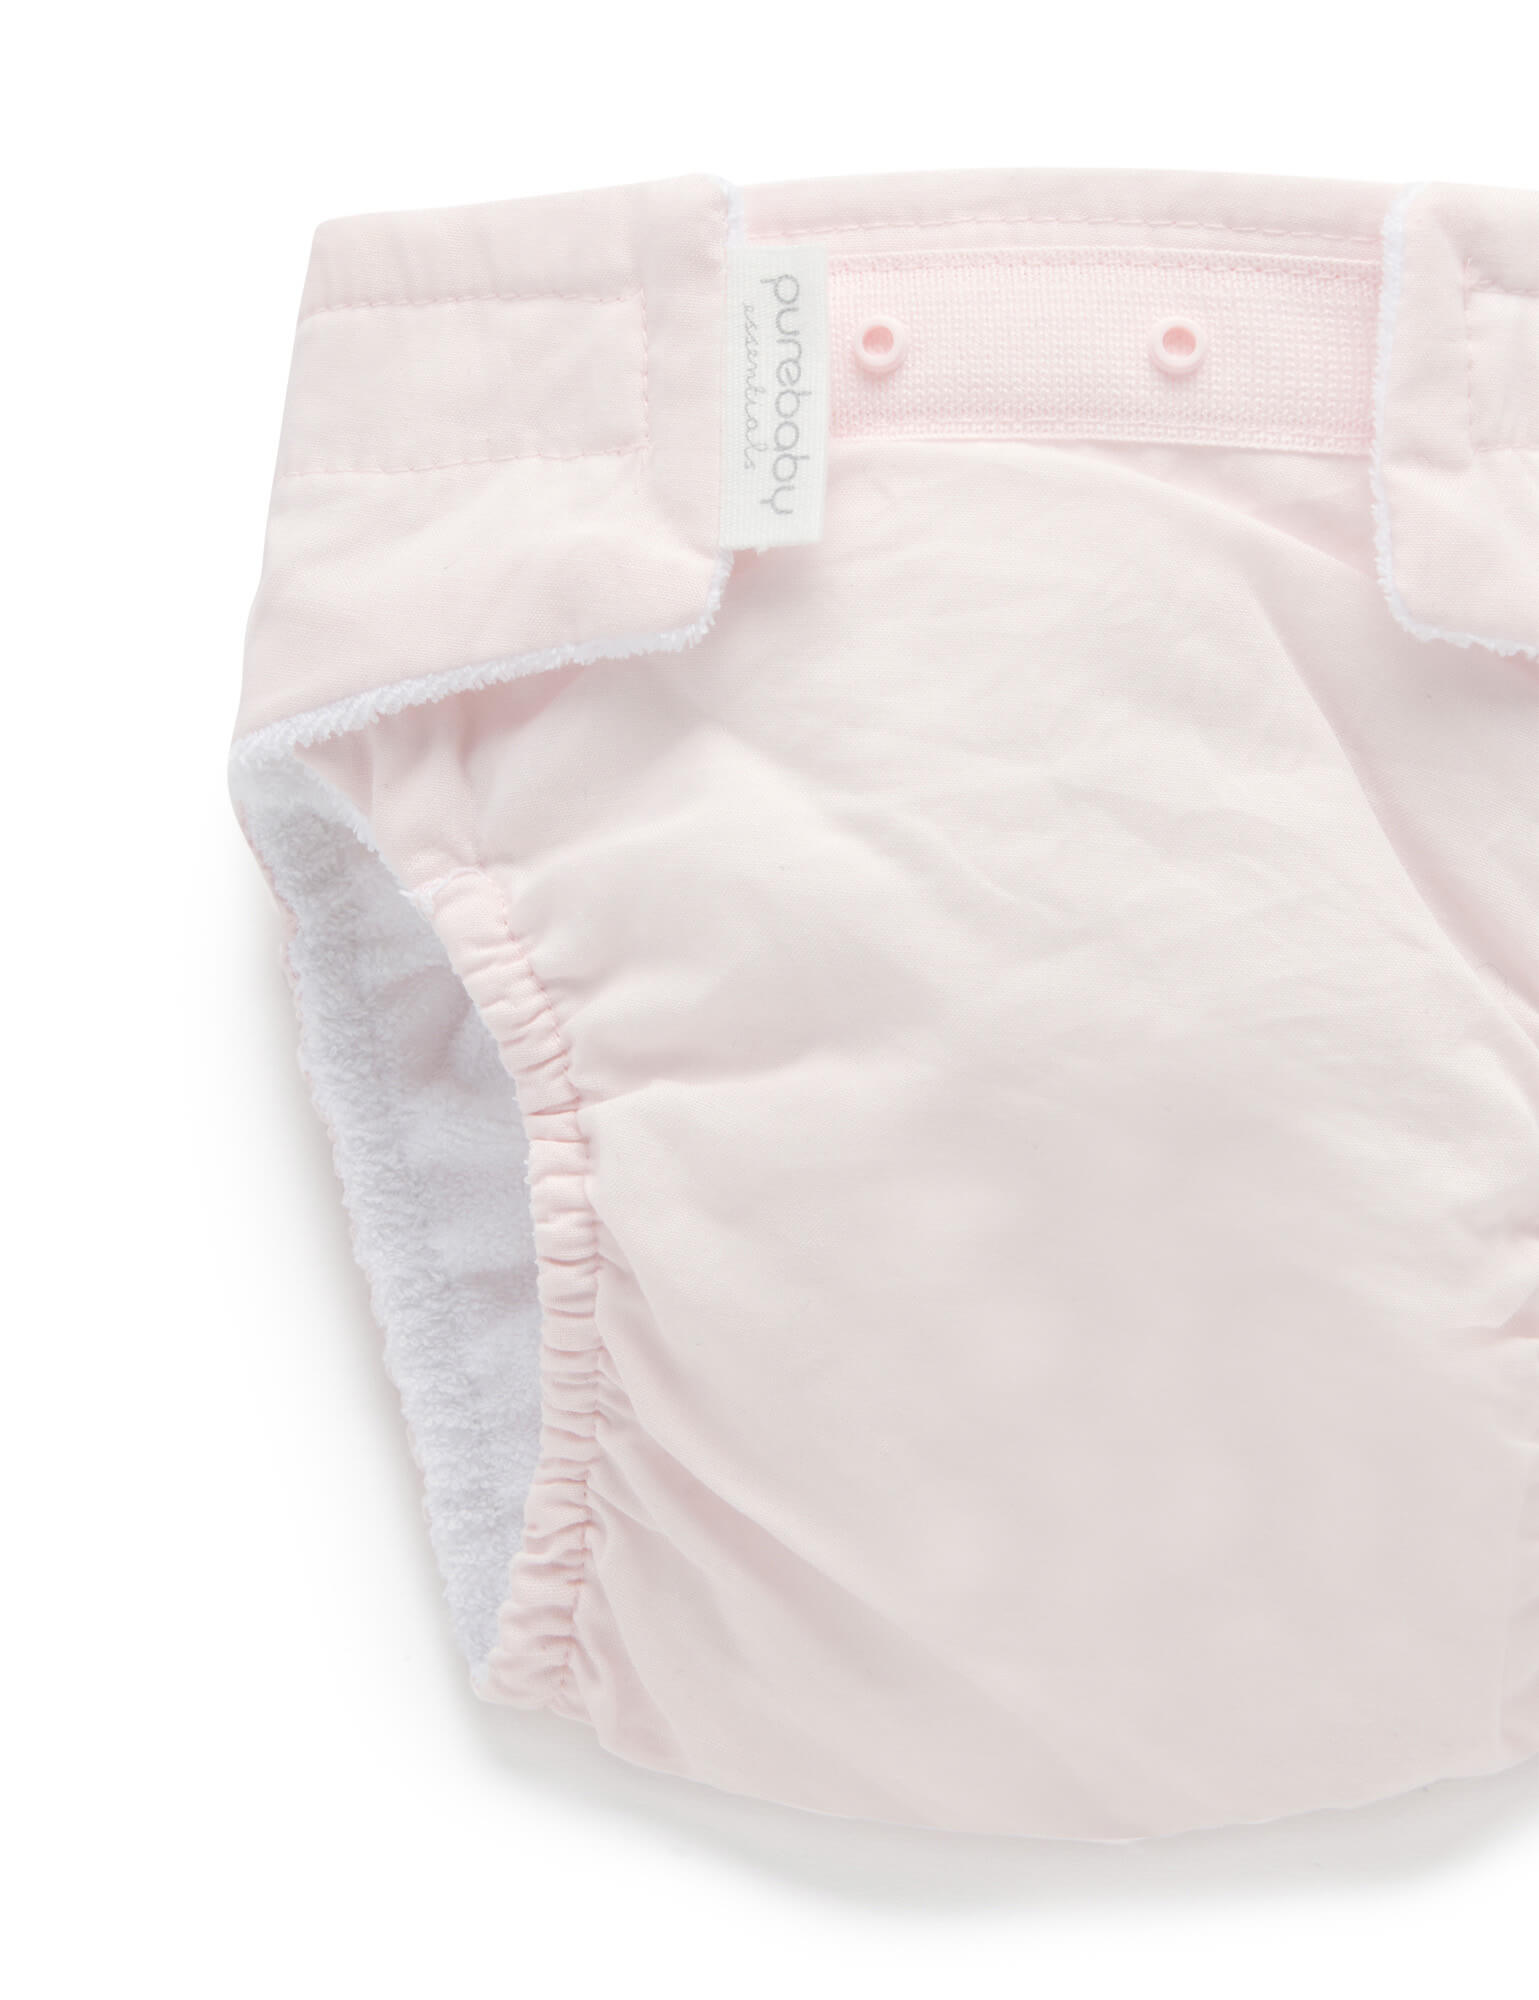 Reusable Nappy Starter Kit in Pale Pink